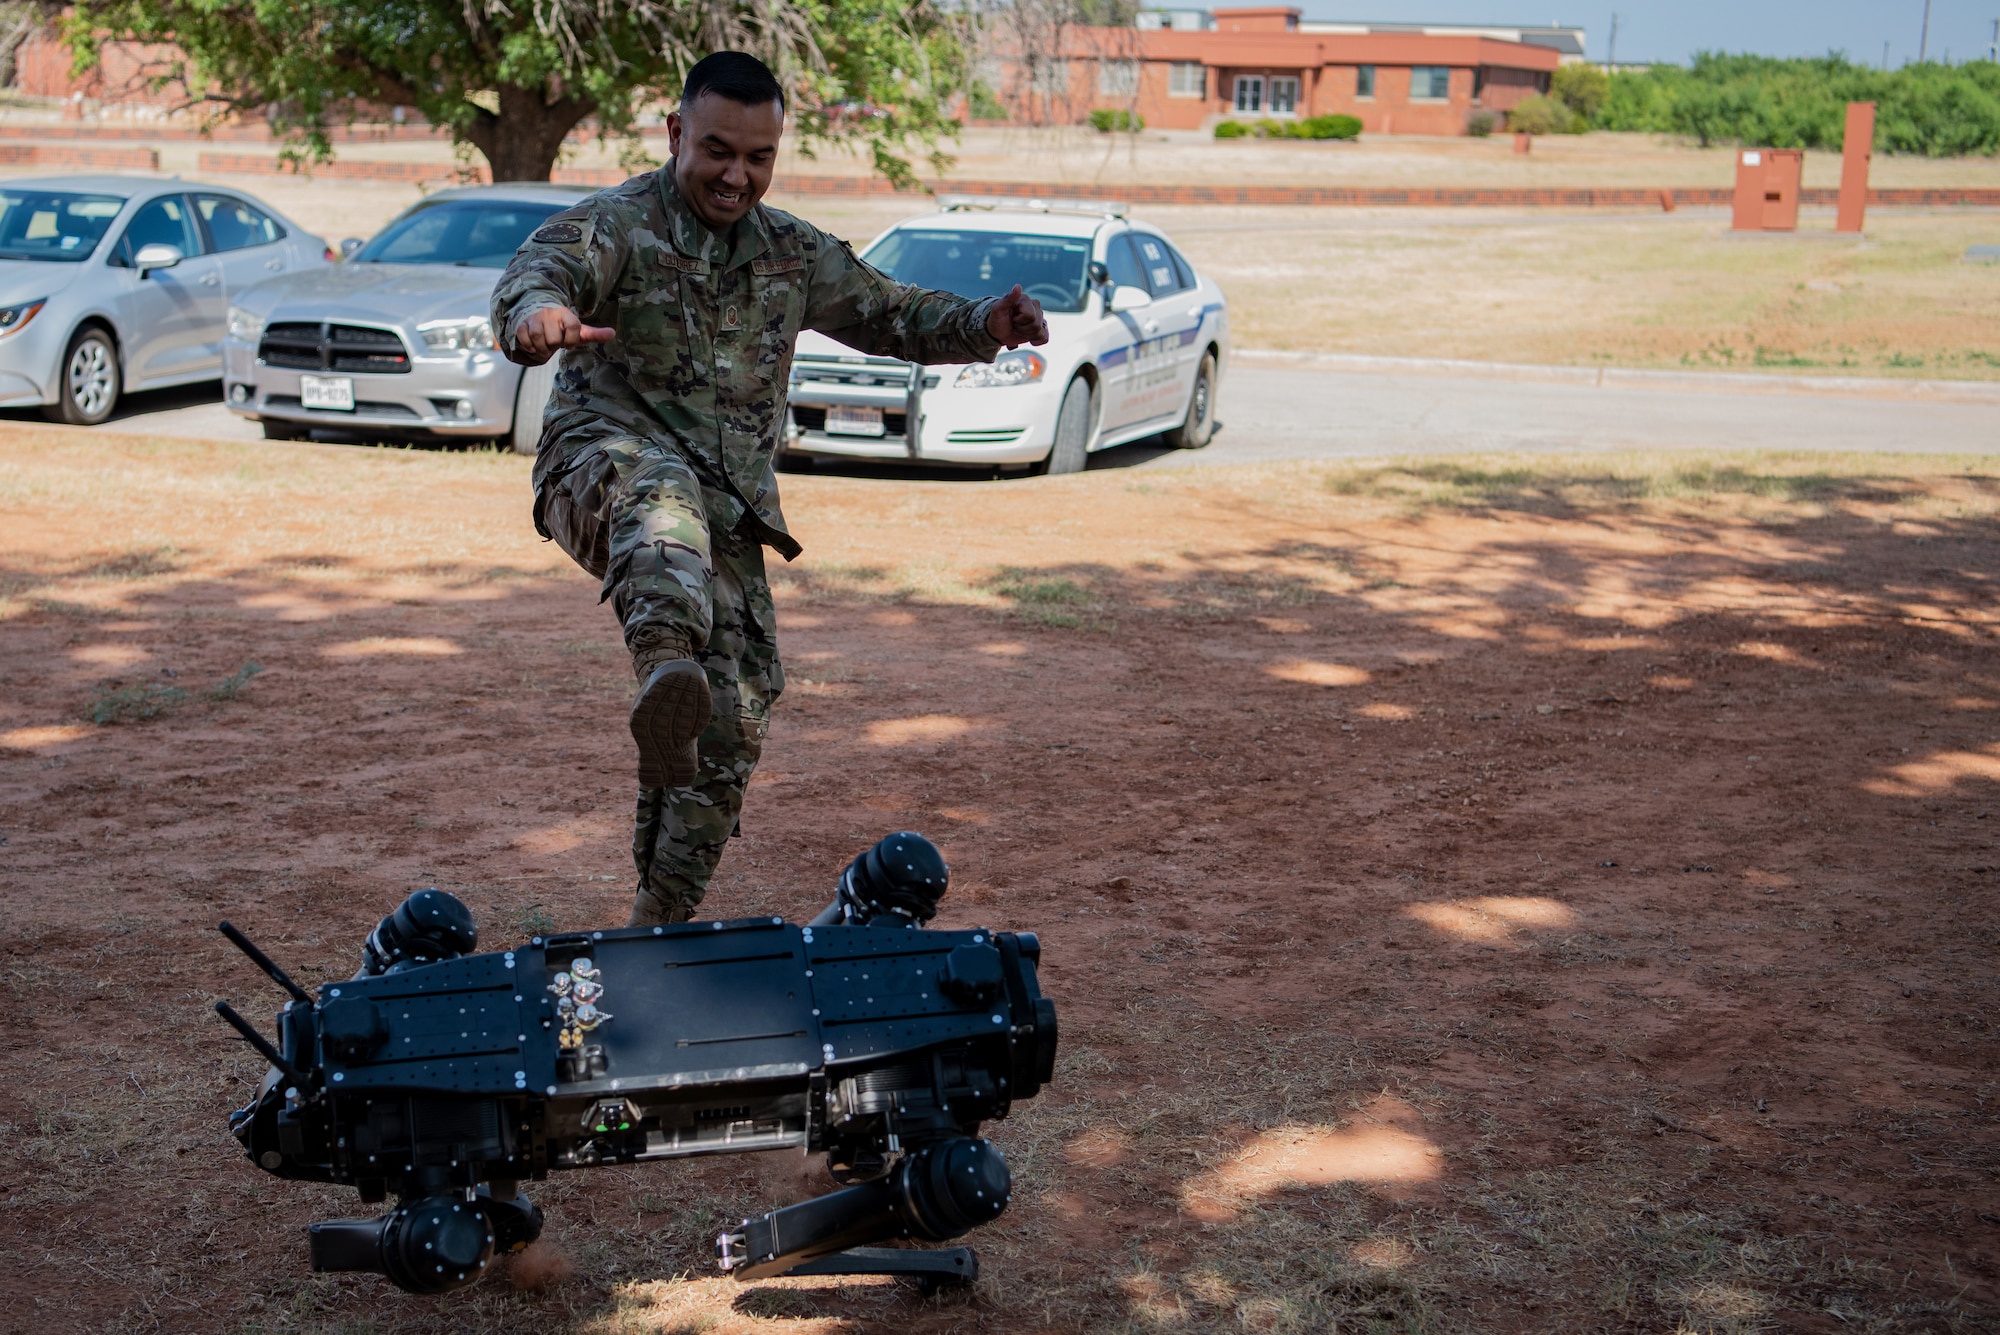 Master Sgt. Jaime Gutierrez, 7th Security Forces Squadron plans and programs superintendent, performs a durability and strength test against a robot dog at Dyess Air Force Base, Texas, Aug. 5, 2022. The addition of the robot dogs will multiply the capabilities of 7th SFS to enable rapid find, fix and finish missions. (U.S. Air Force photo by Airman 1st Class Ryan Hayman)